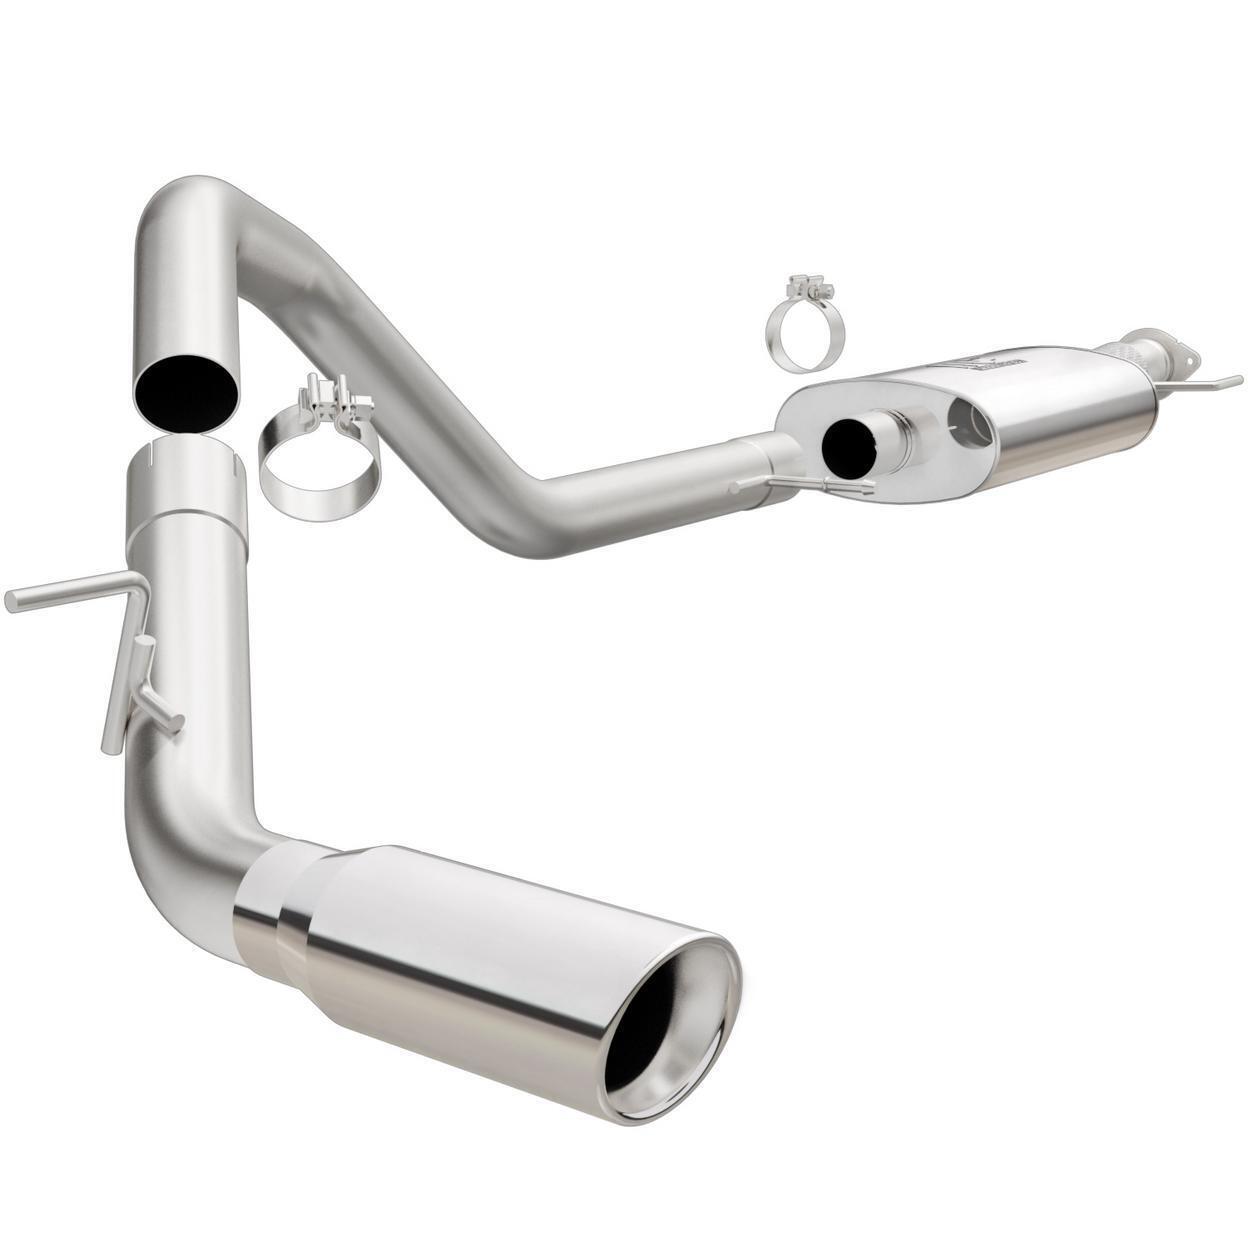 MagnaFlow 19051-AX Exhaust System Kit for 2016 Lincoln Navigator